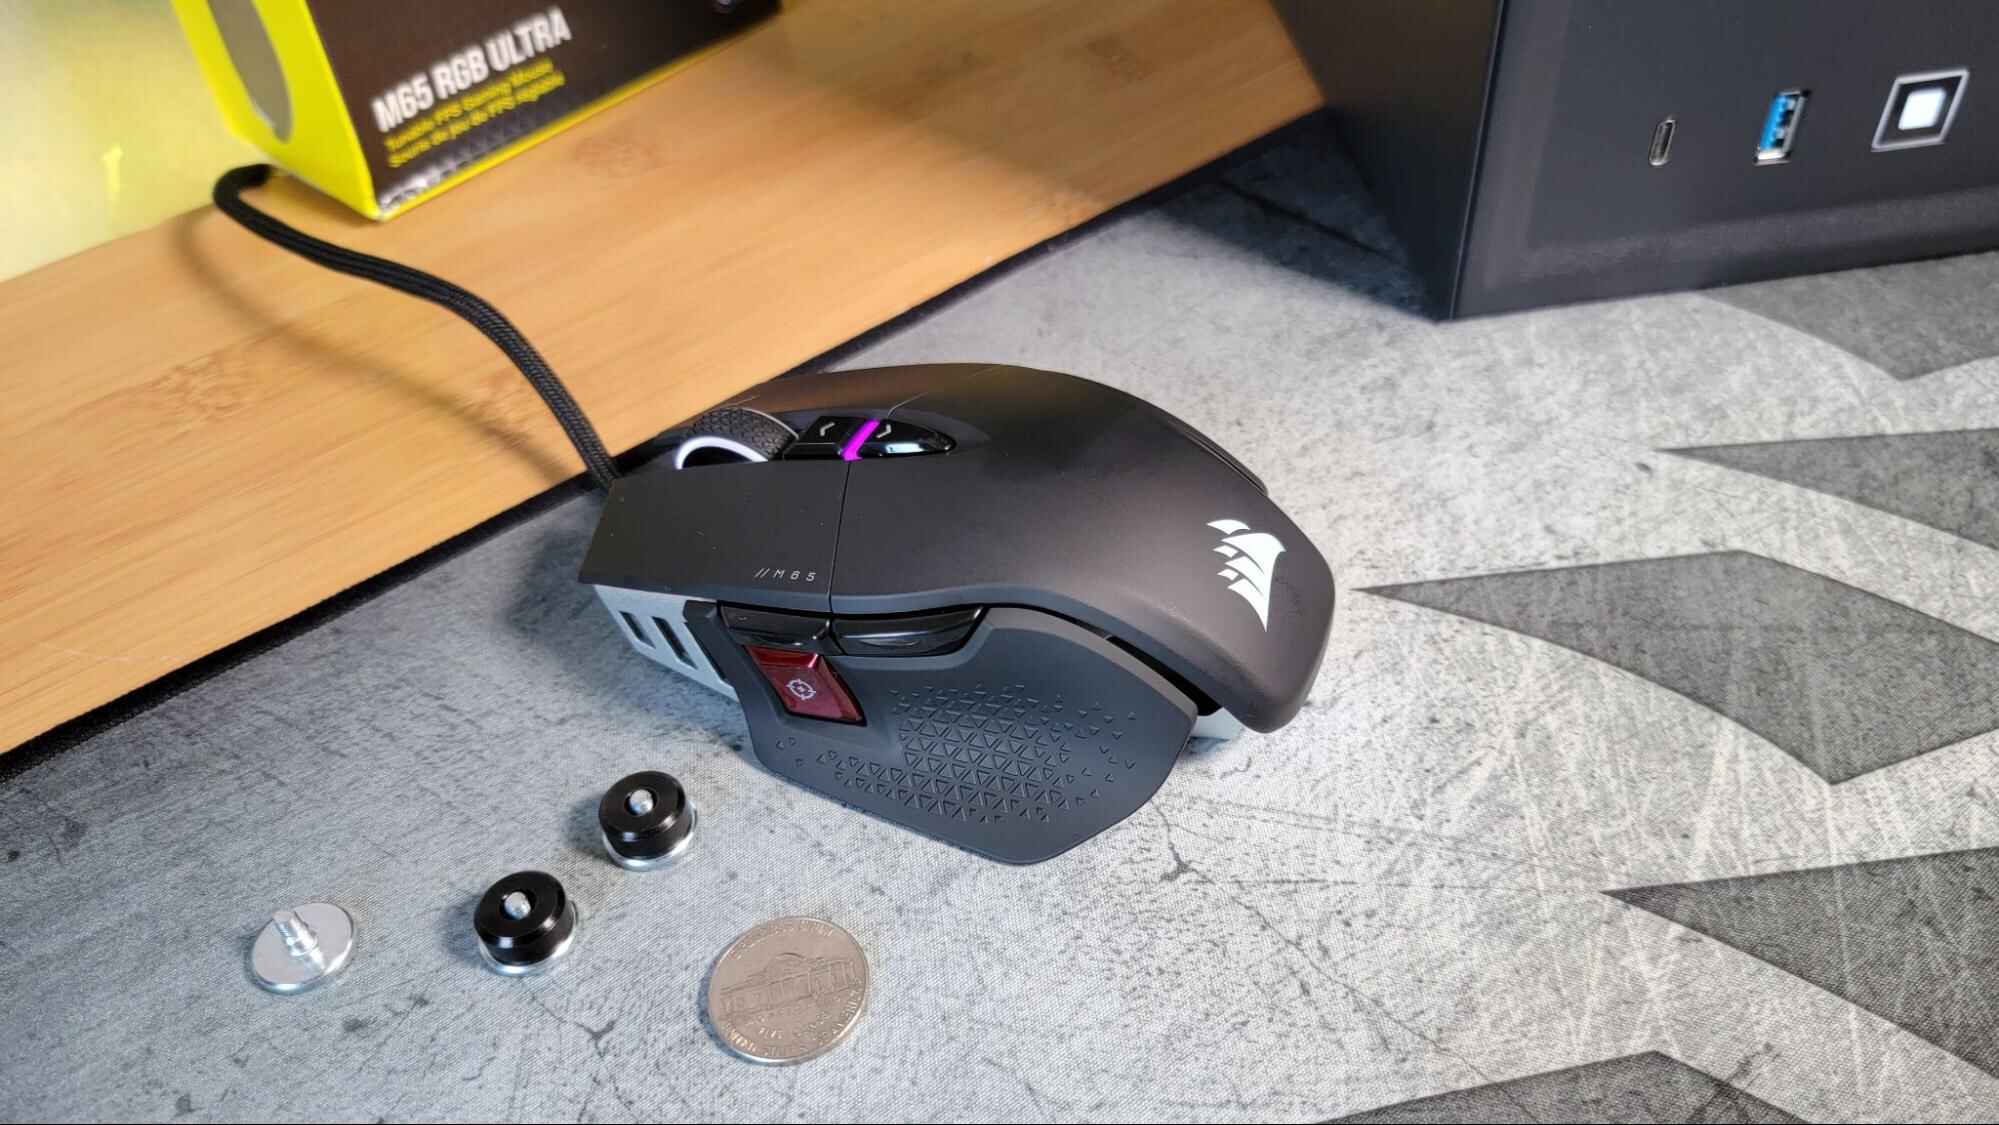 what-does-the-sniper-button-on-the-m65-pro-rgb-fps-gaming-mouse-do